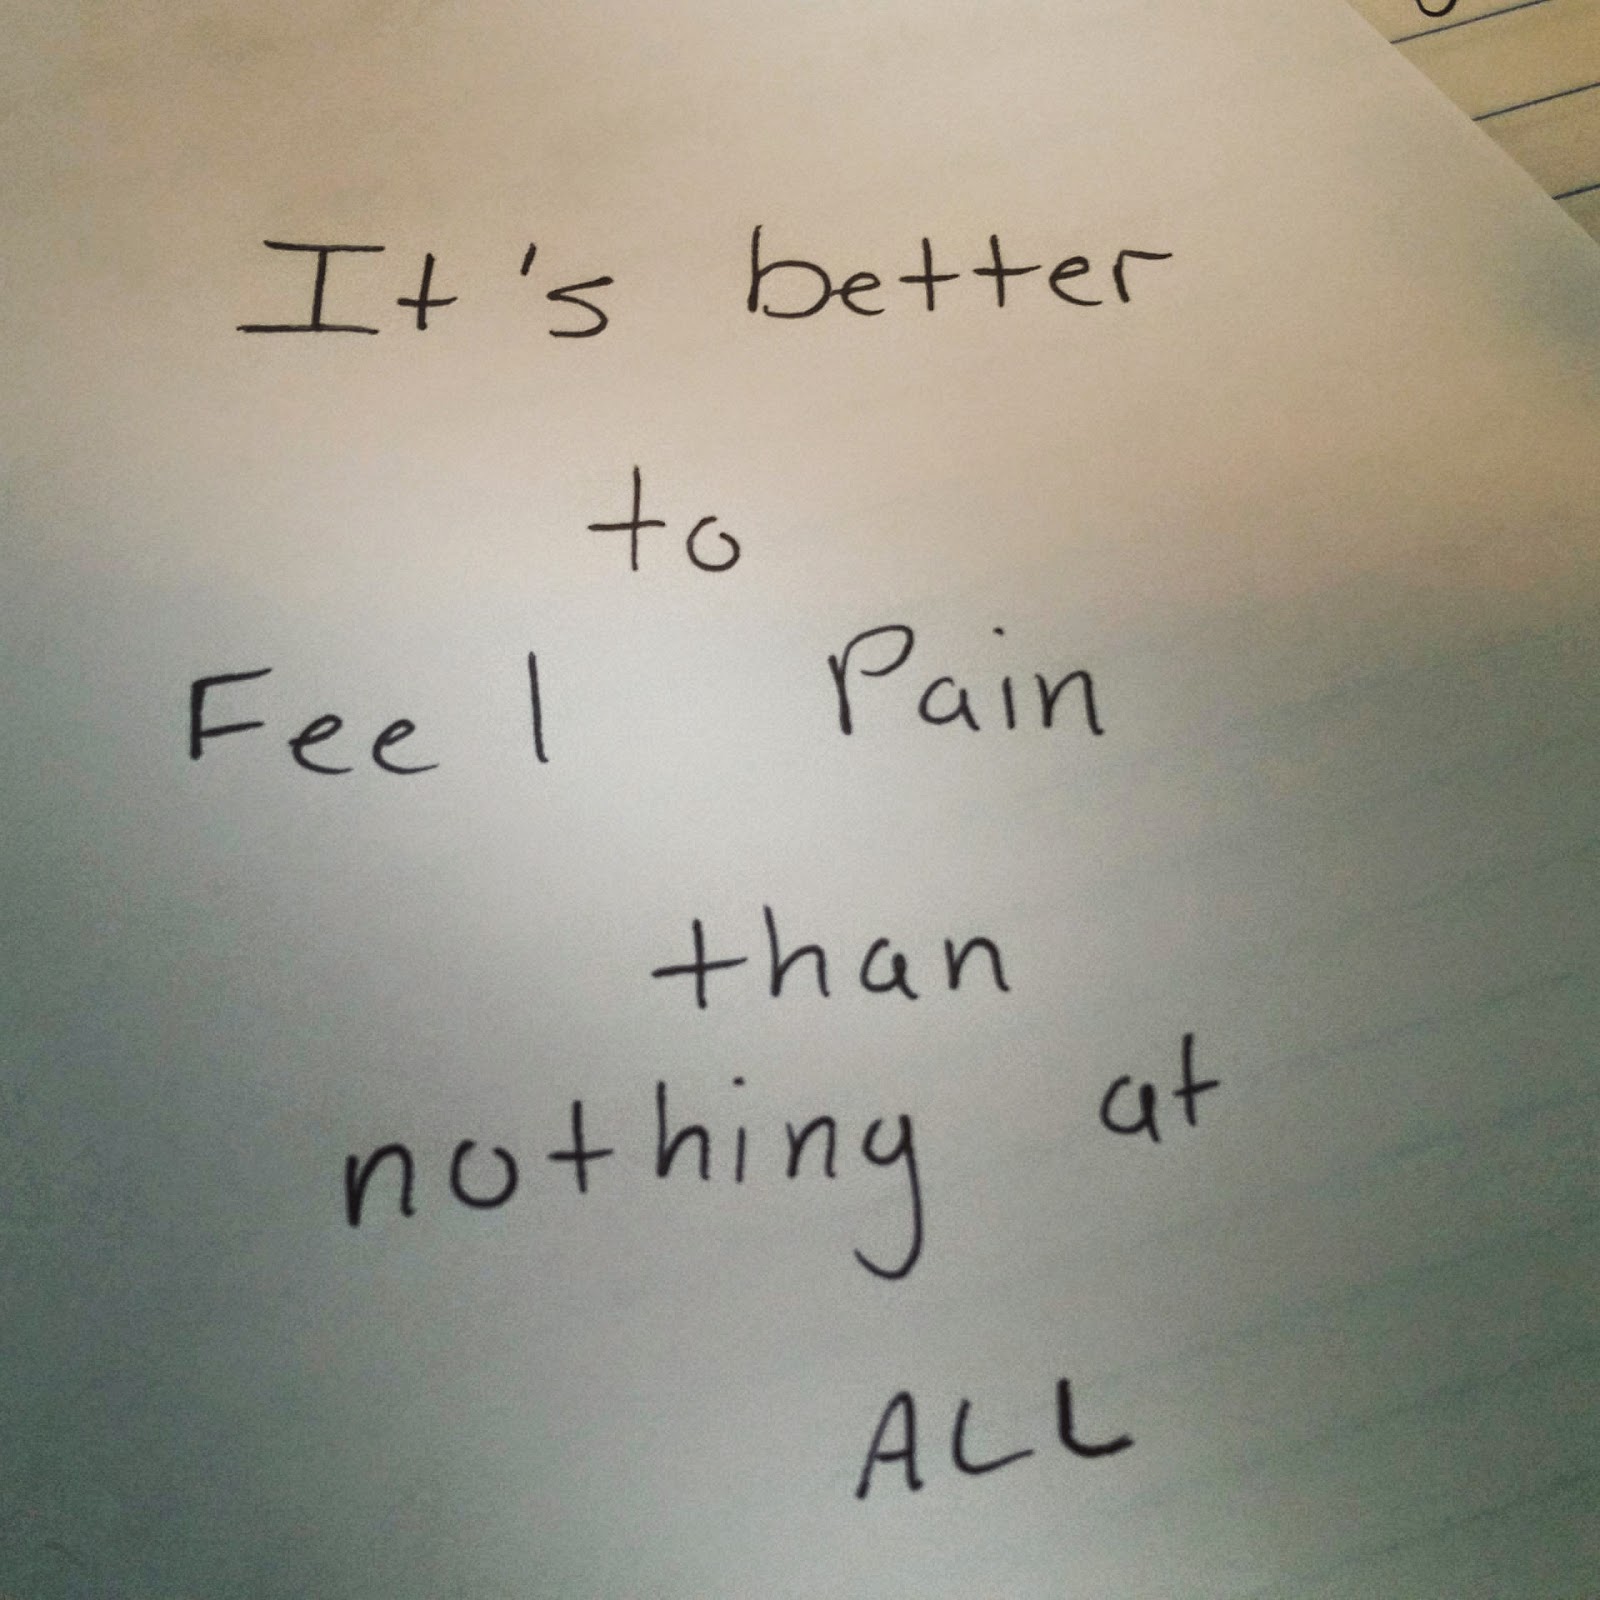 Pictures and Poetry : Its Better to Feel Pain than Nothing at All.